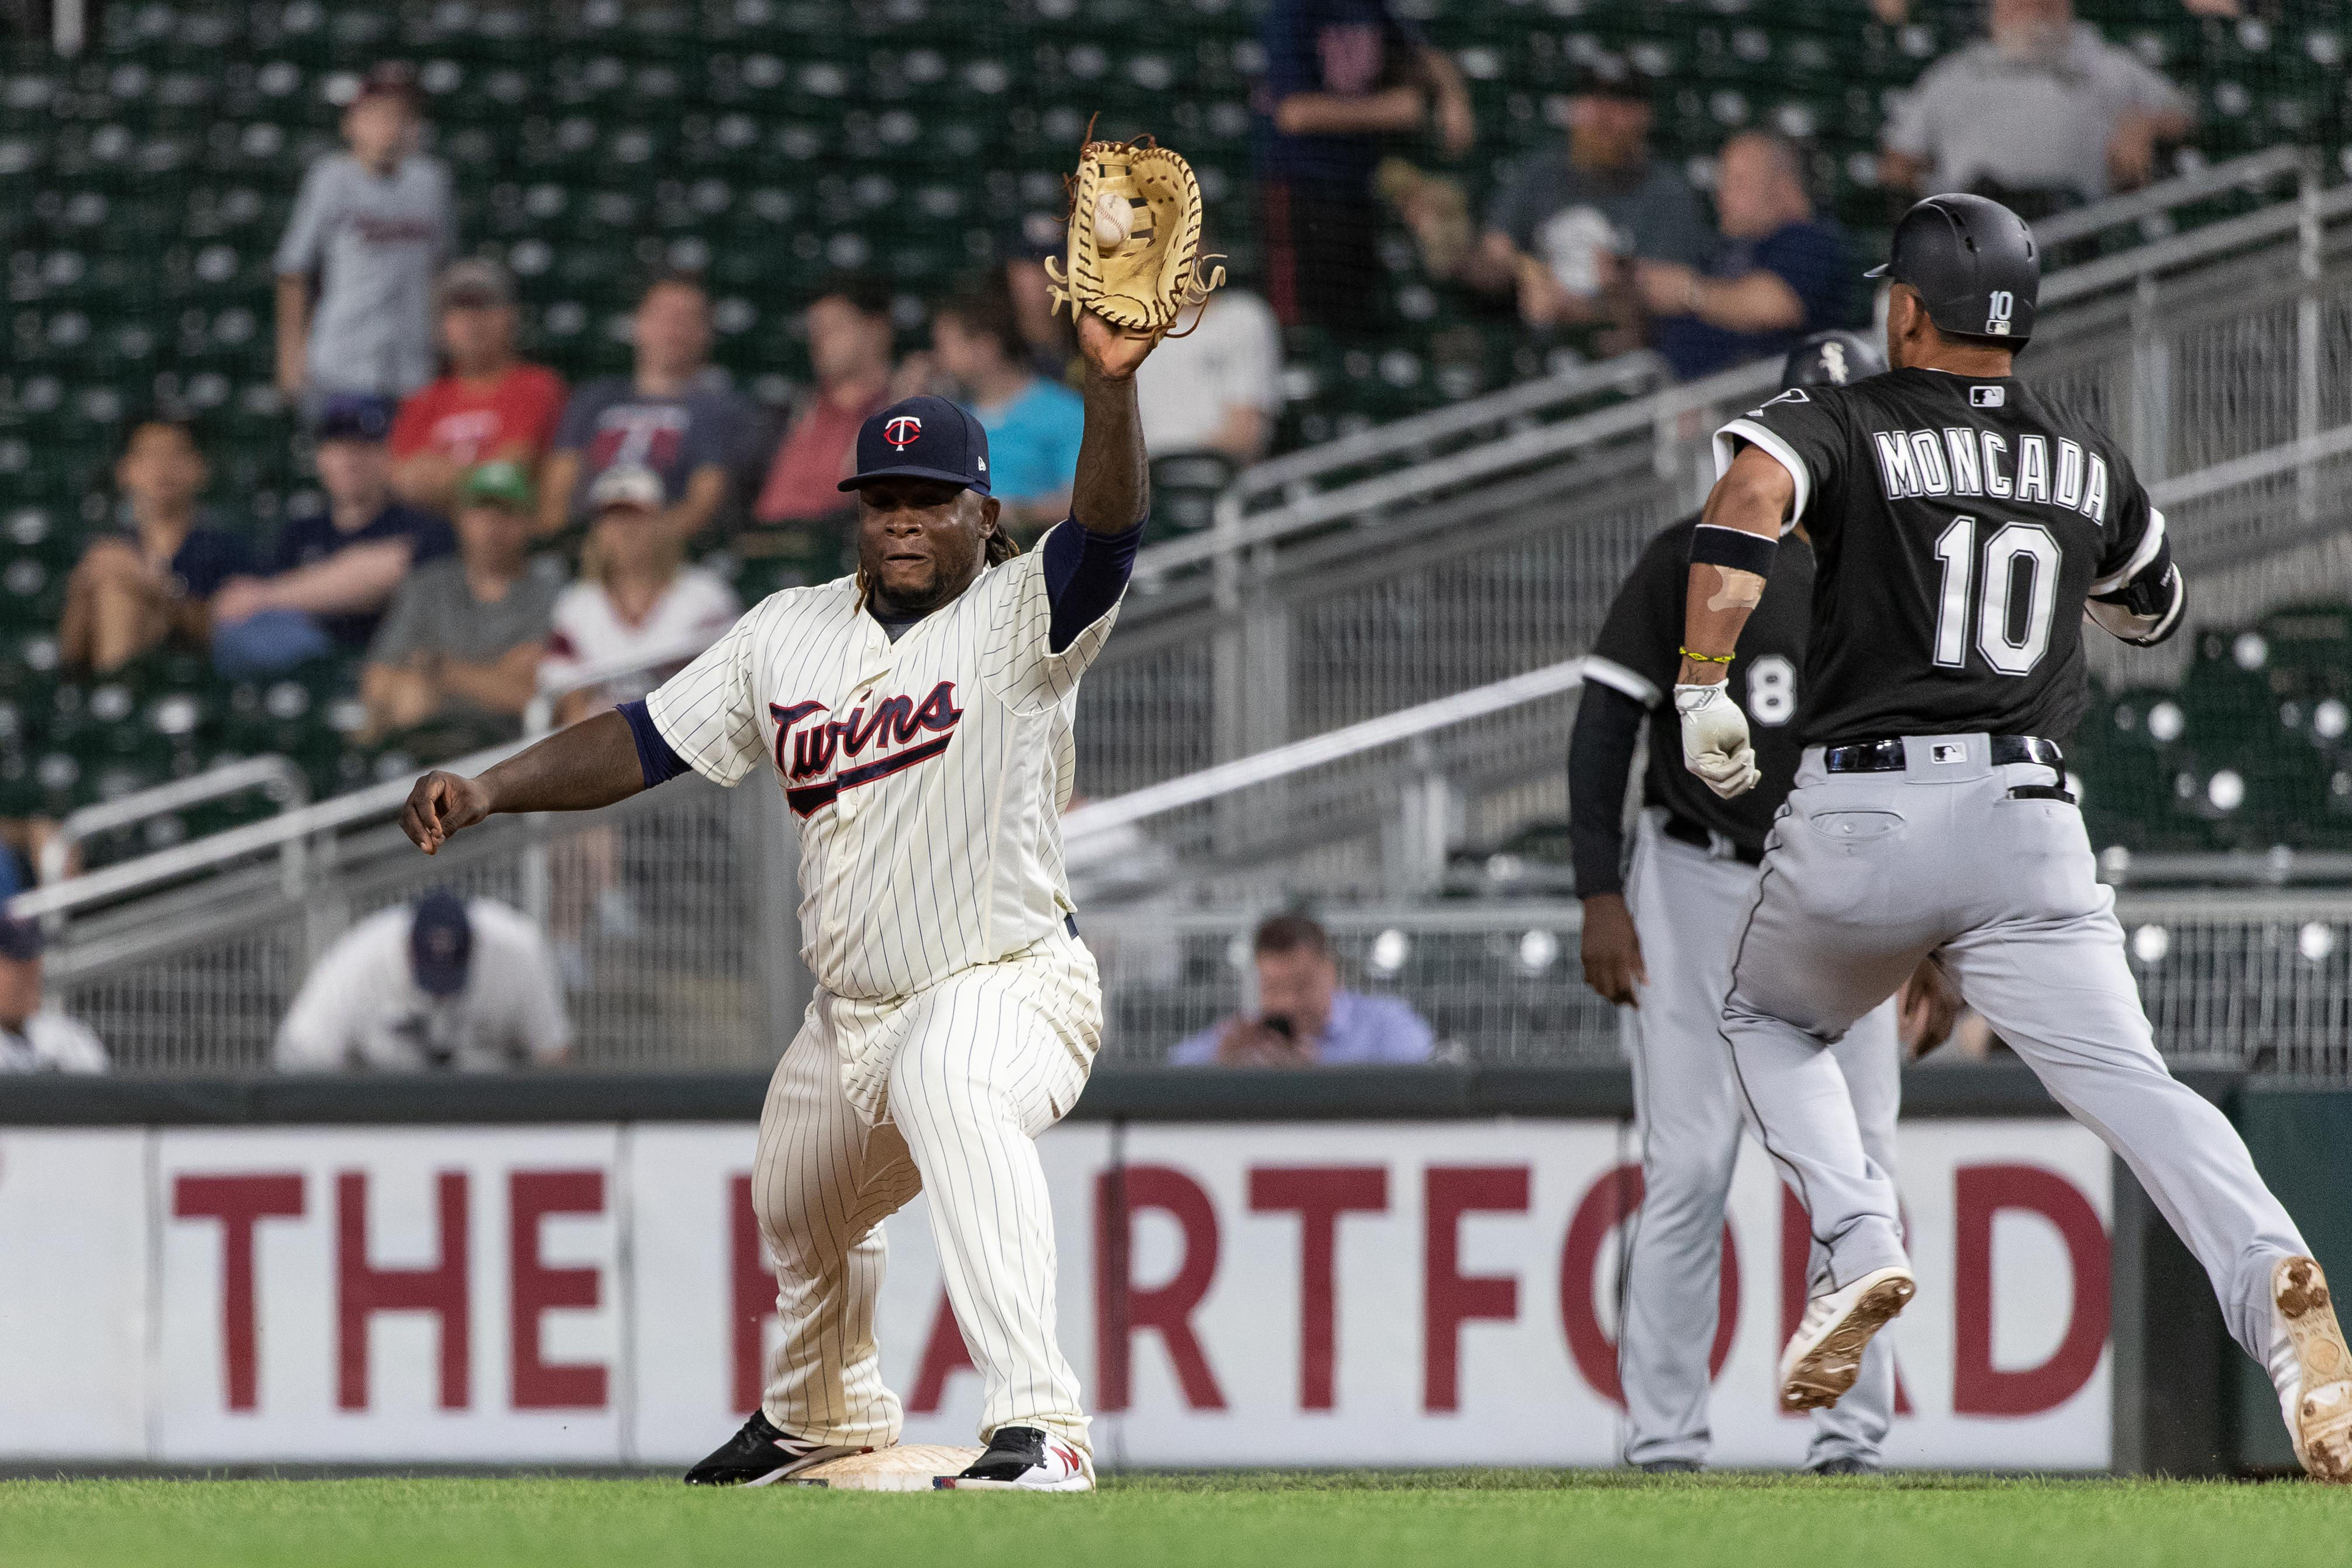 Season ends early, again, for Twins' Miguel Sano